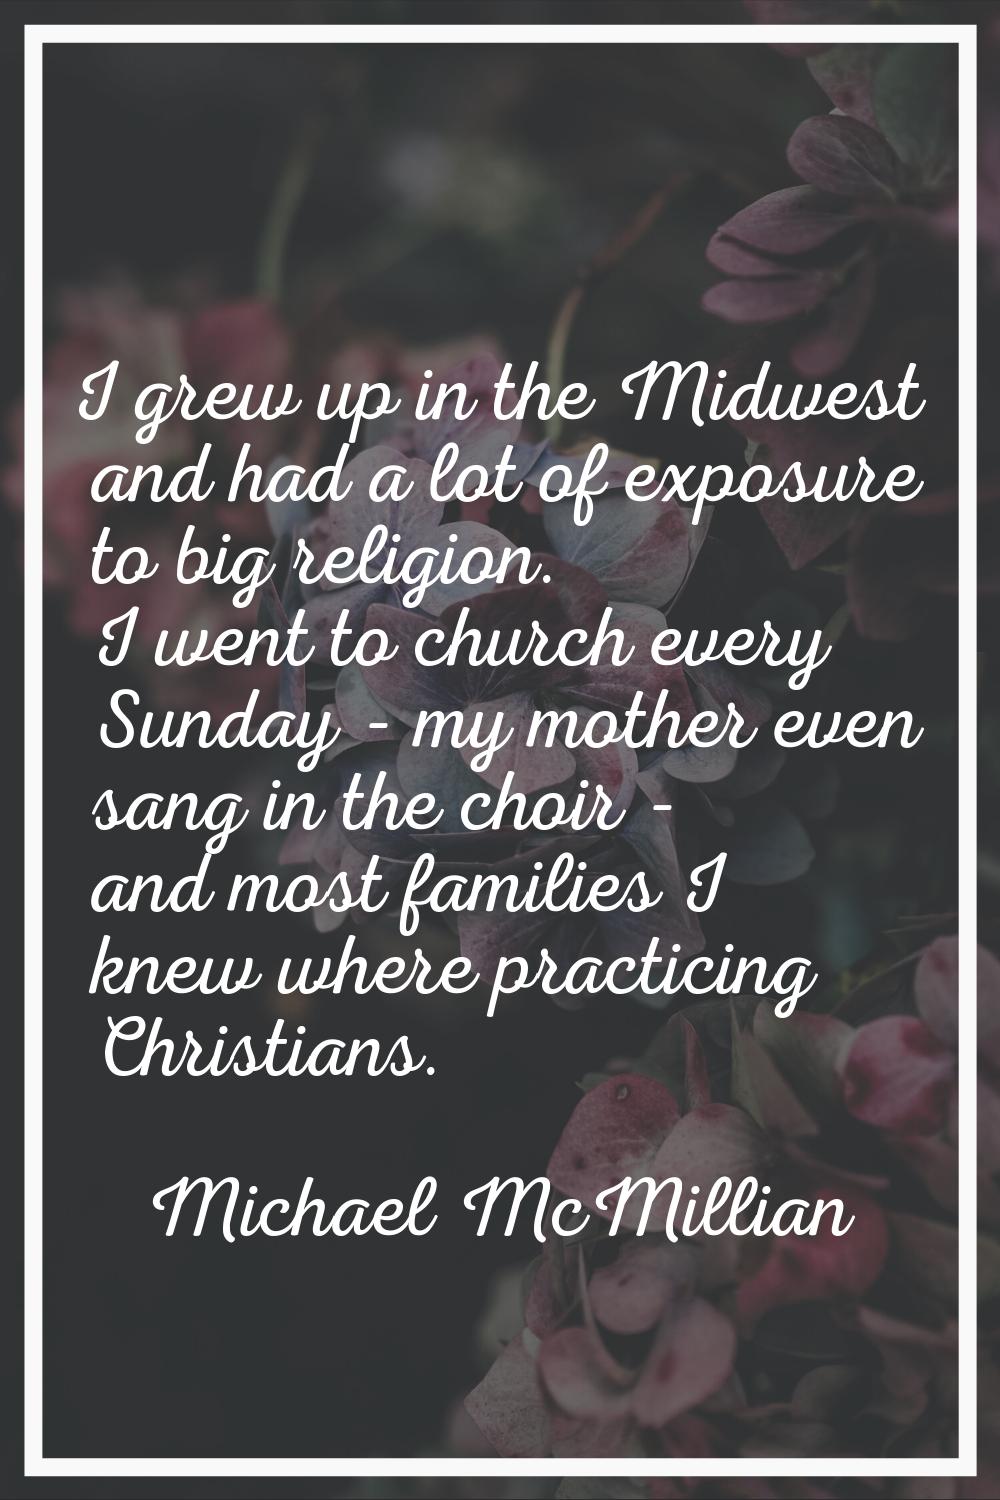 I grew up in the Midwest and had a lot of exposure to big religion. I went to church every Sunday -